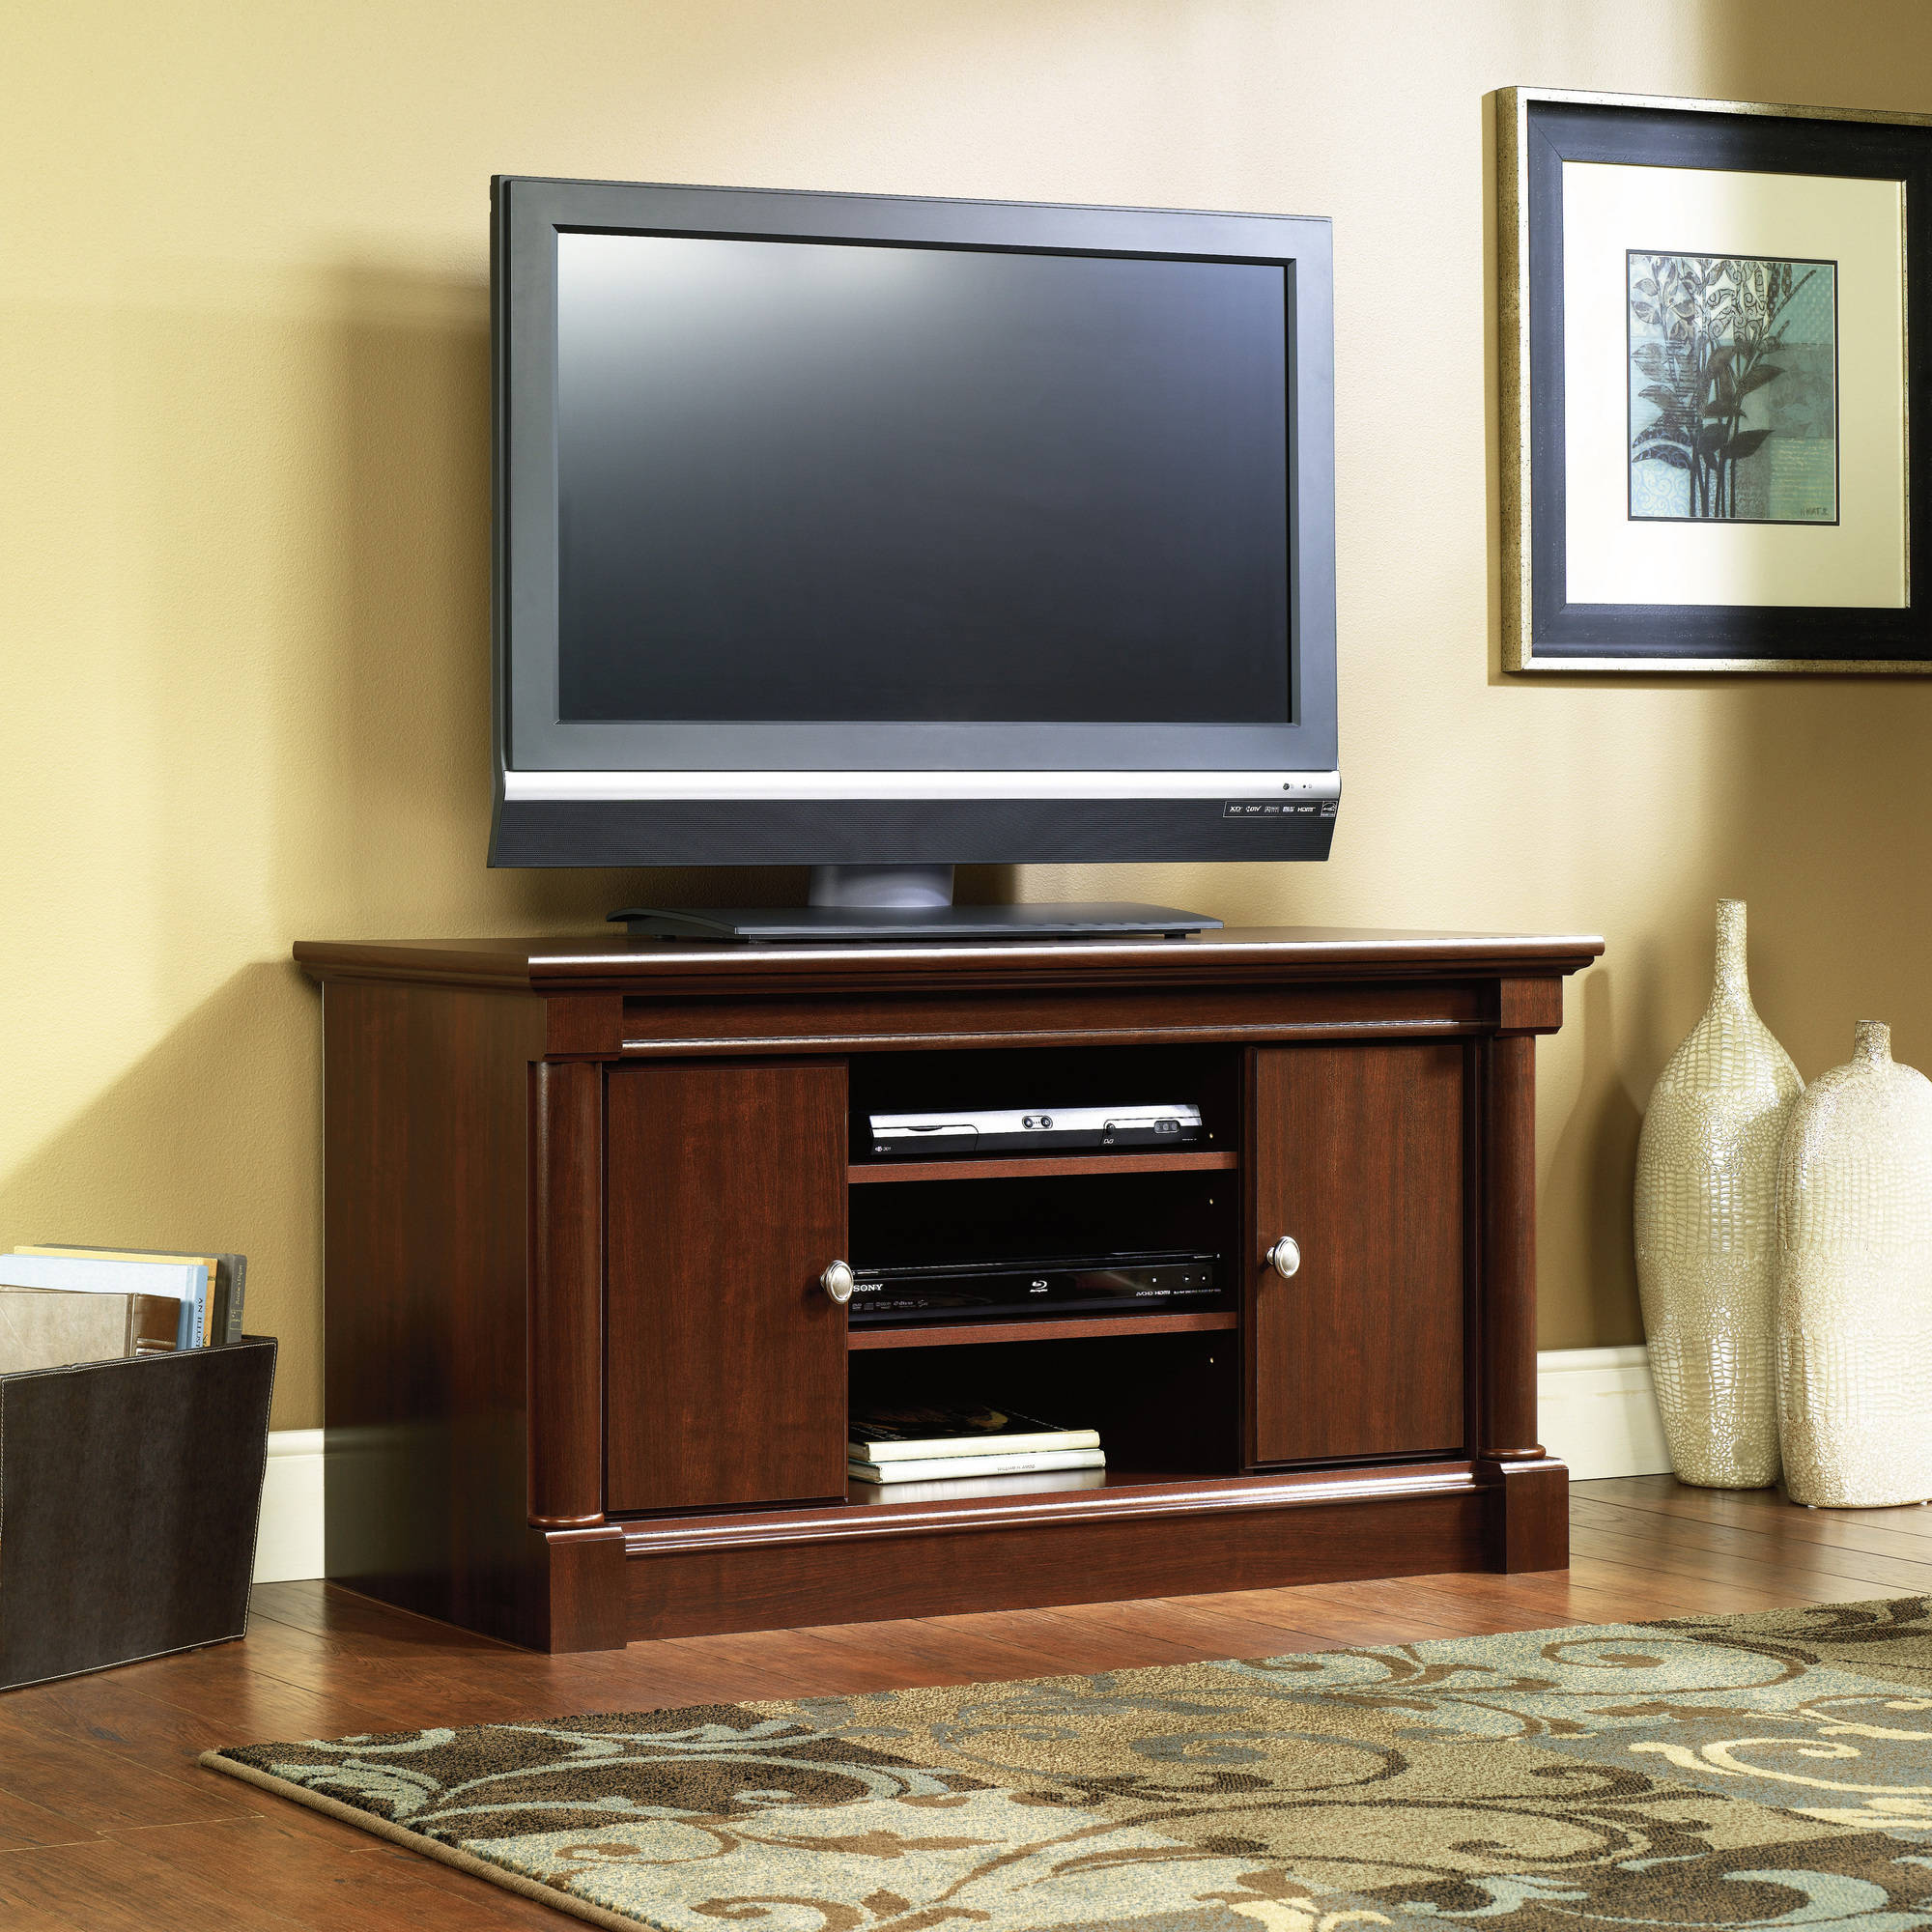 Sauder Palladia Panel TV Stand for TV's up to 50", Select Cherry Finish - image 3 of 4